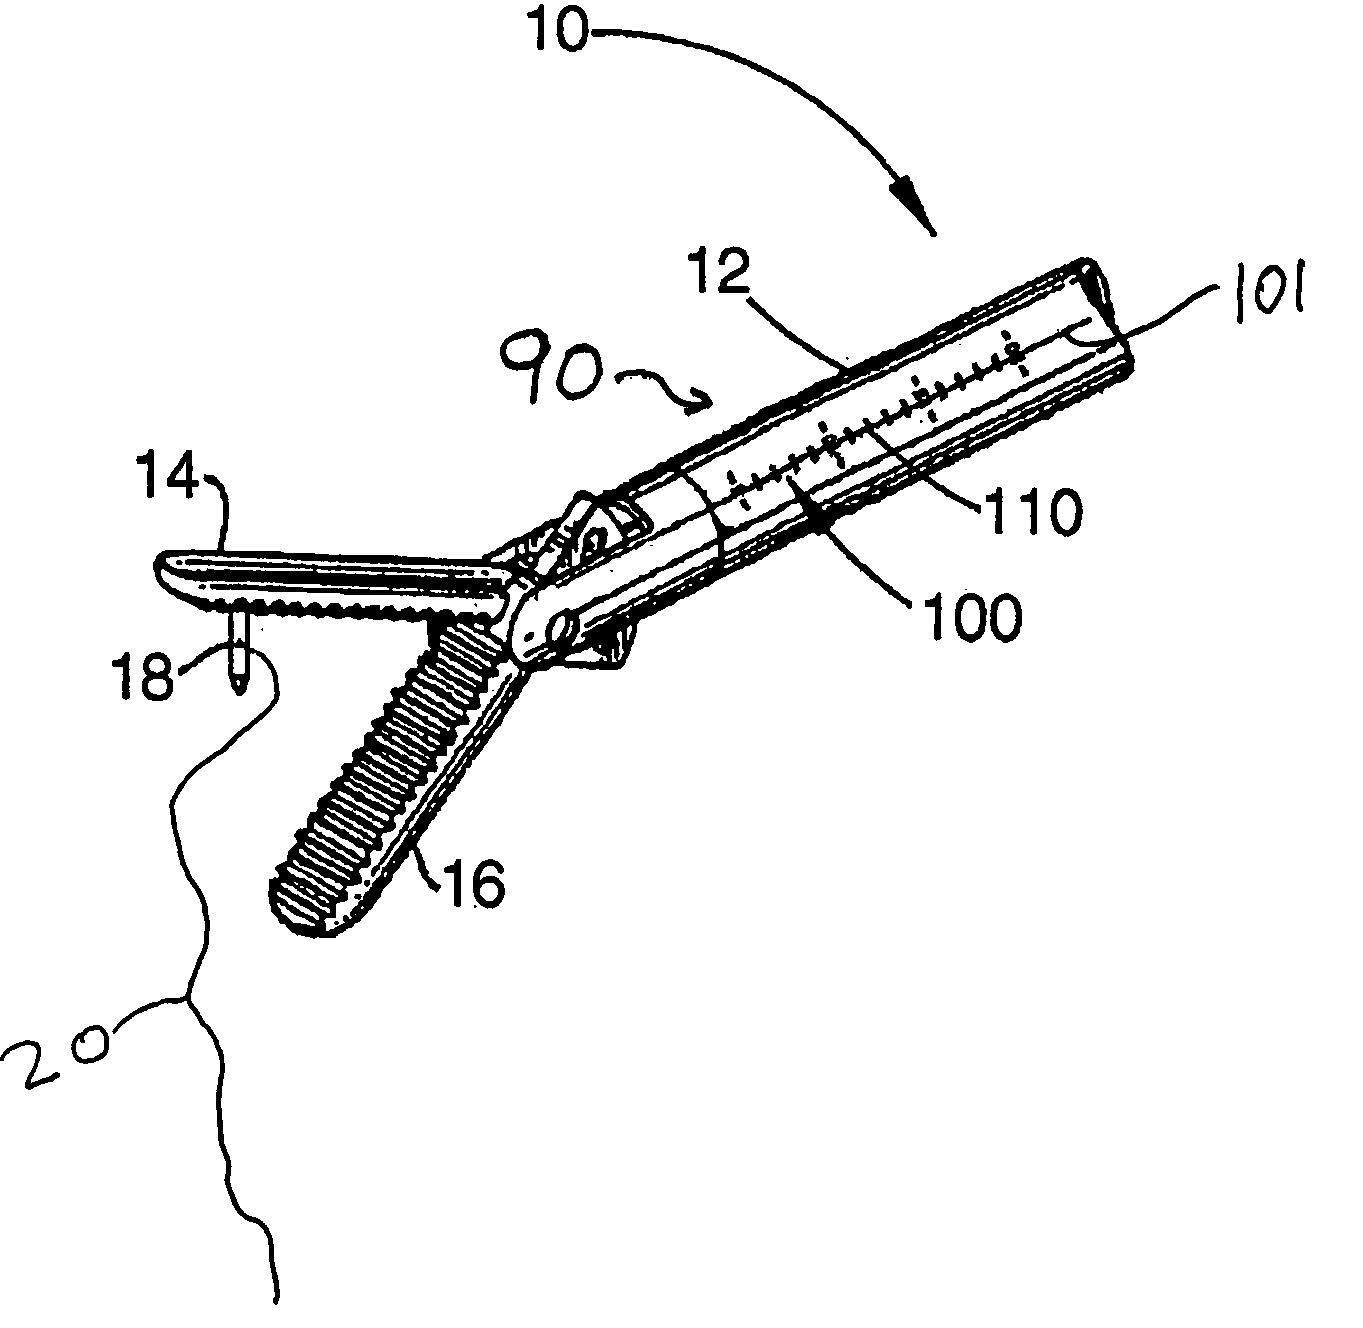 Surgical suturing apparatus with measurement structure